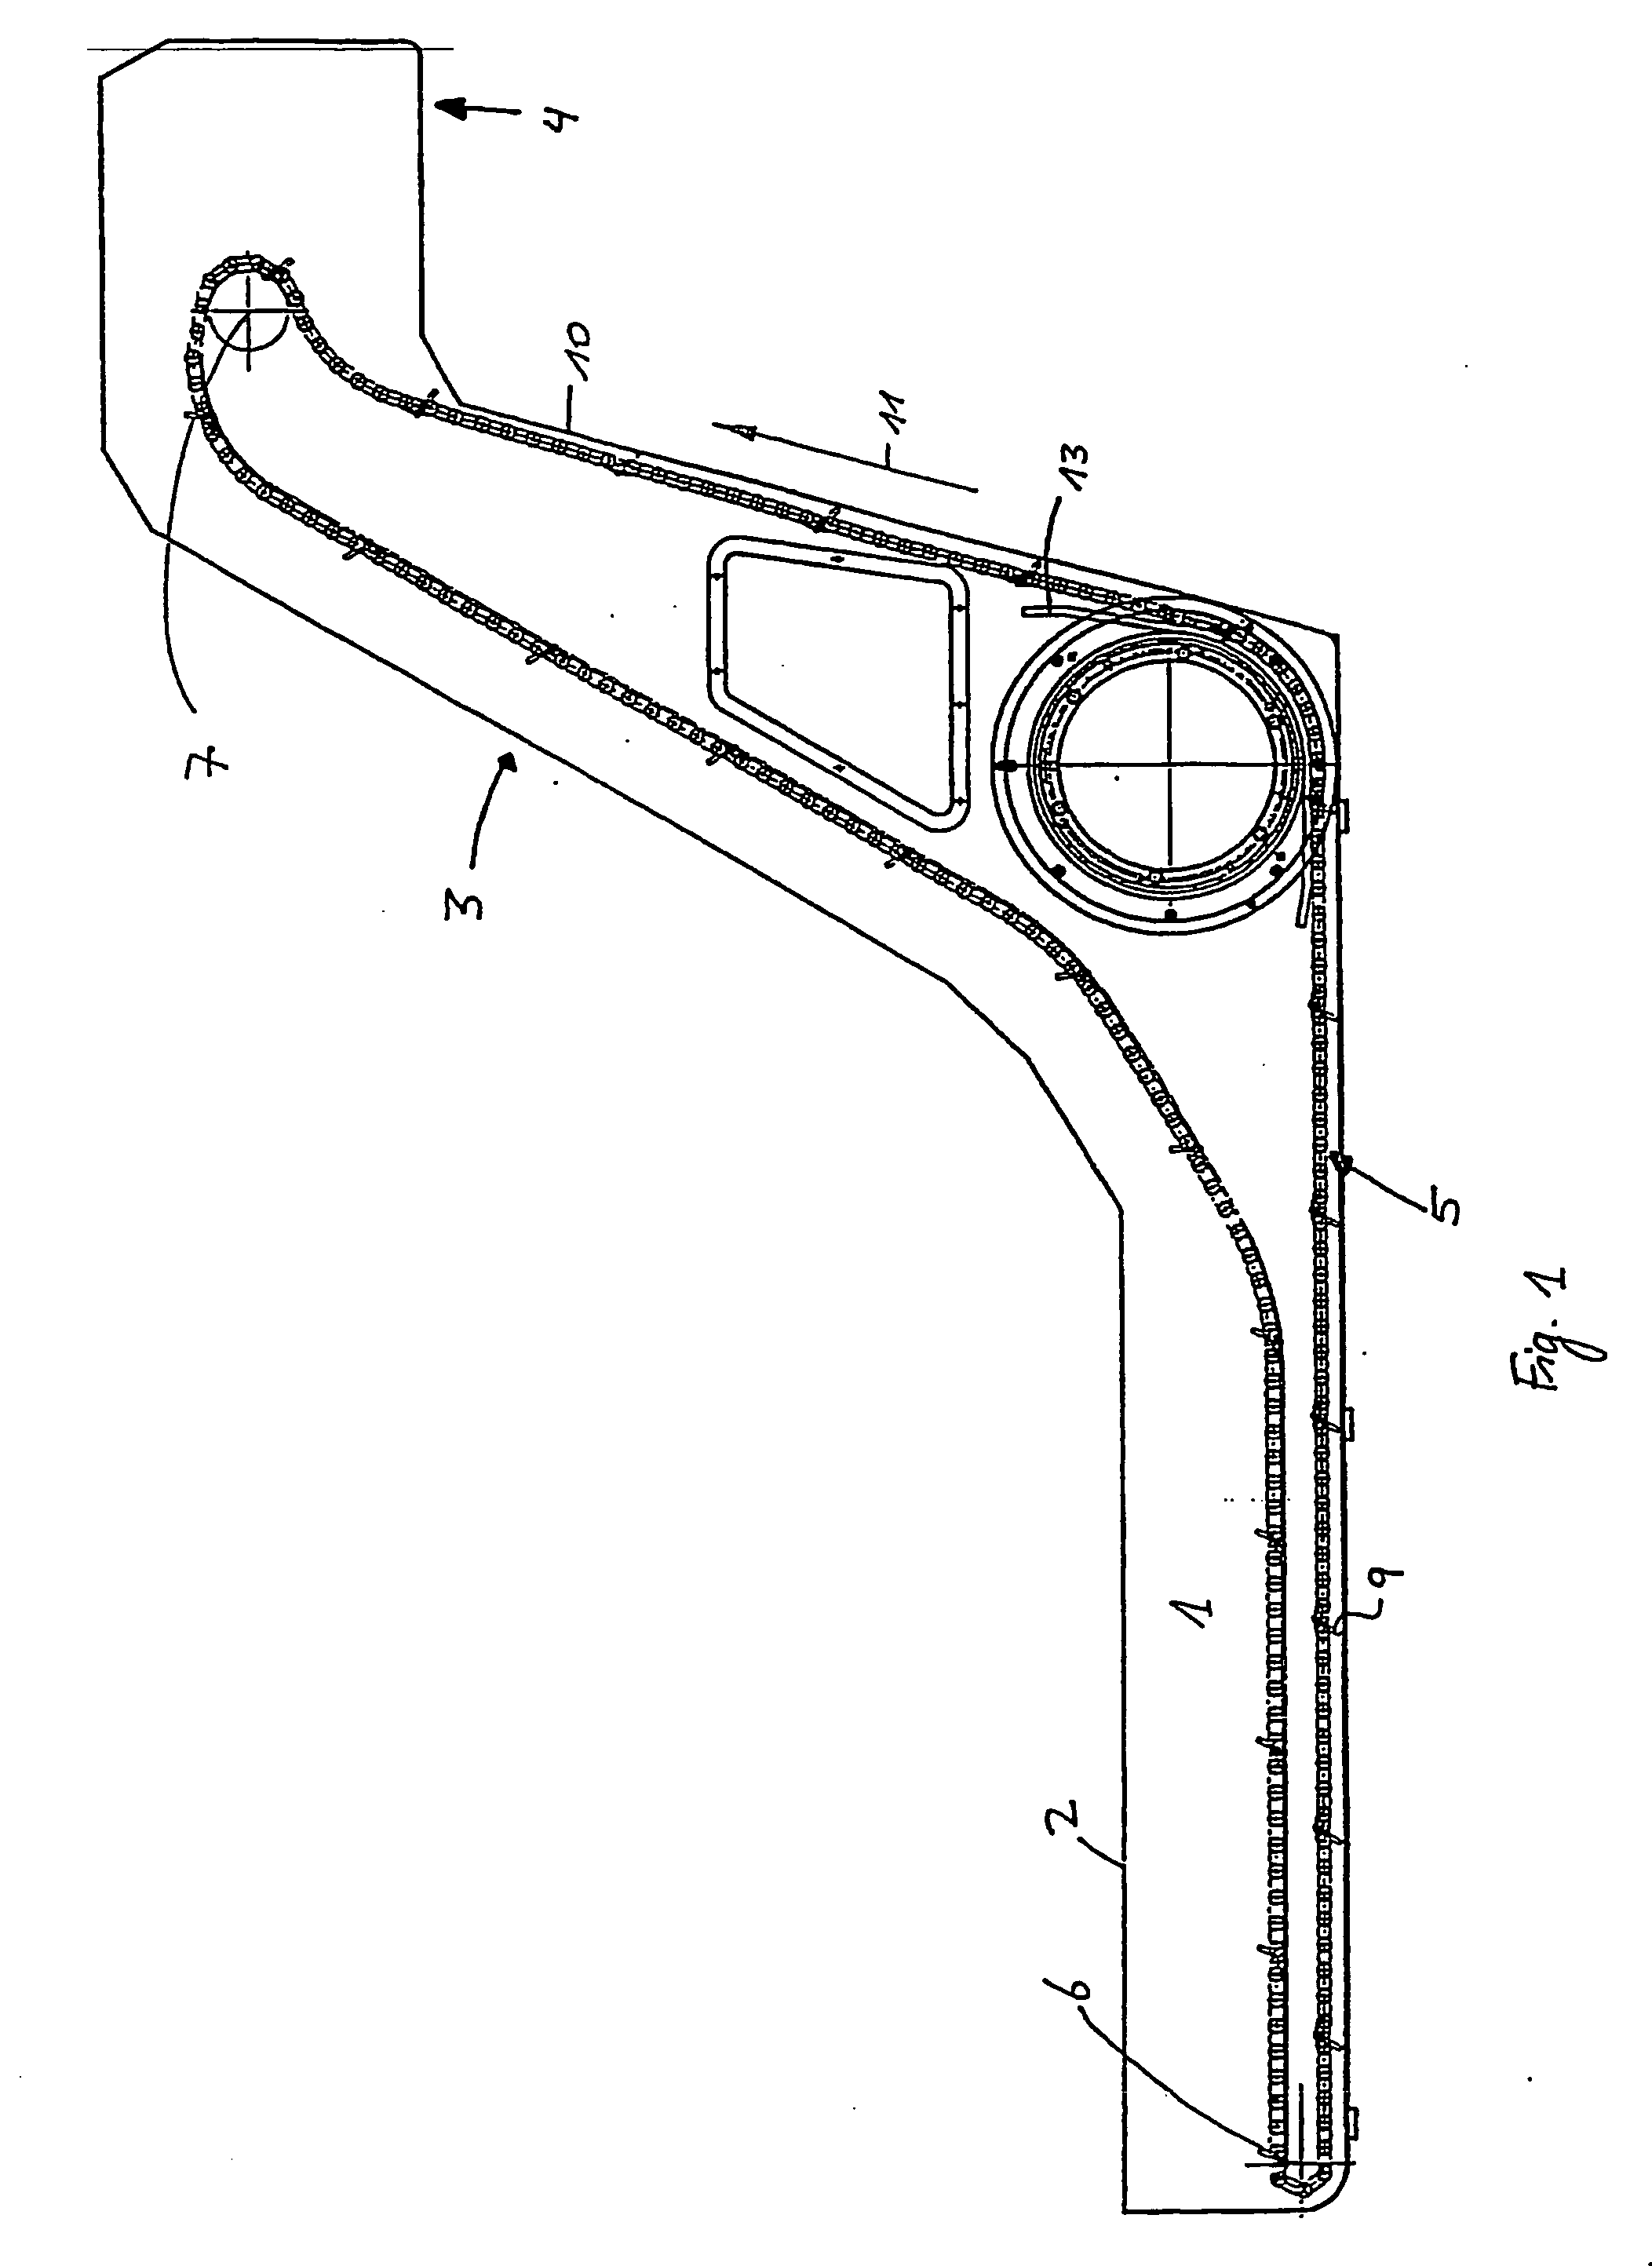 Device for receiving and separating chips and cooling liquid (drive) collecting on machine tools